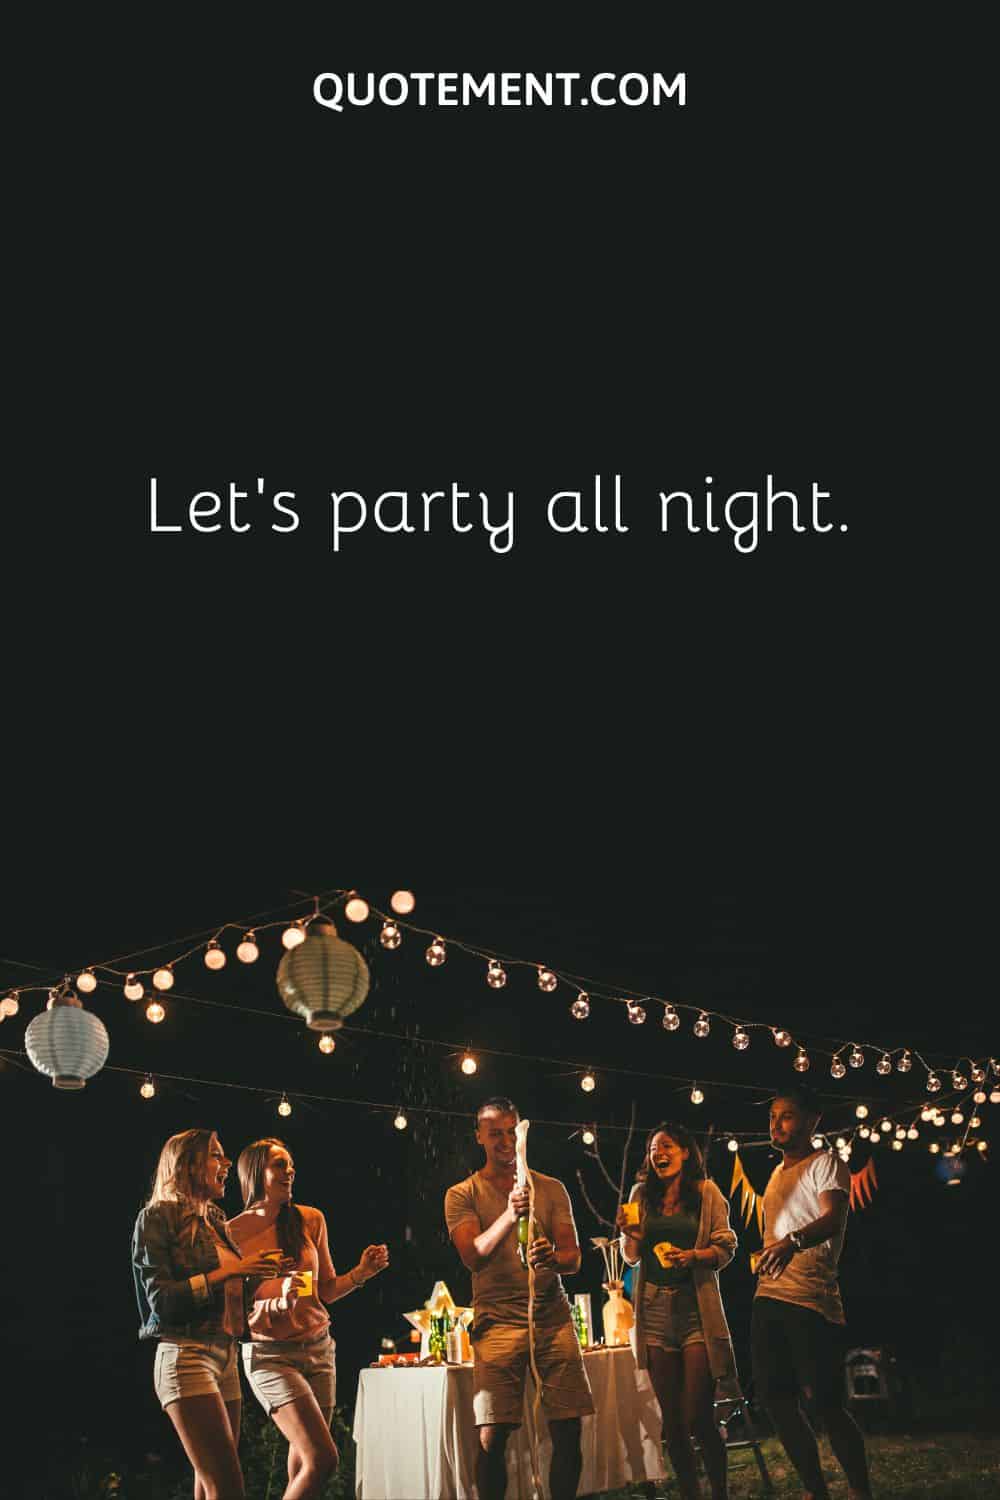 Let’s party all night